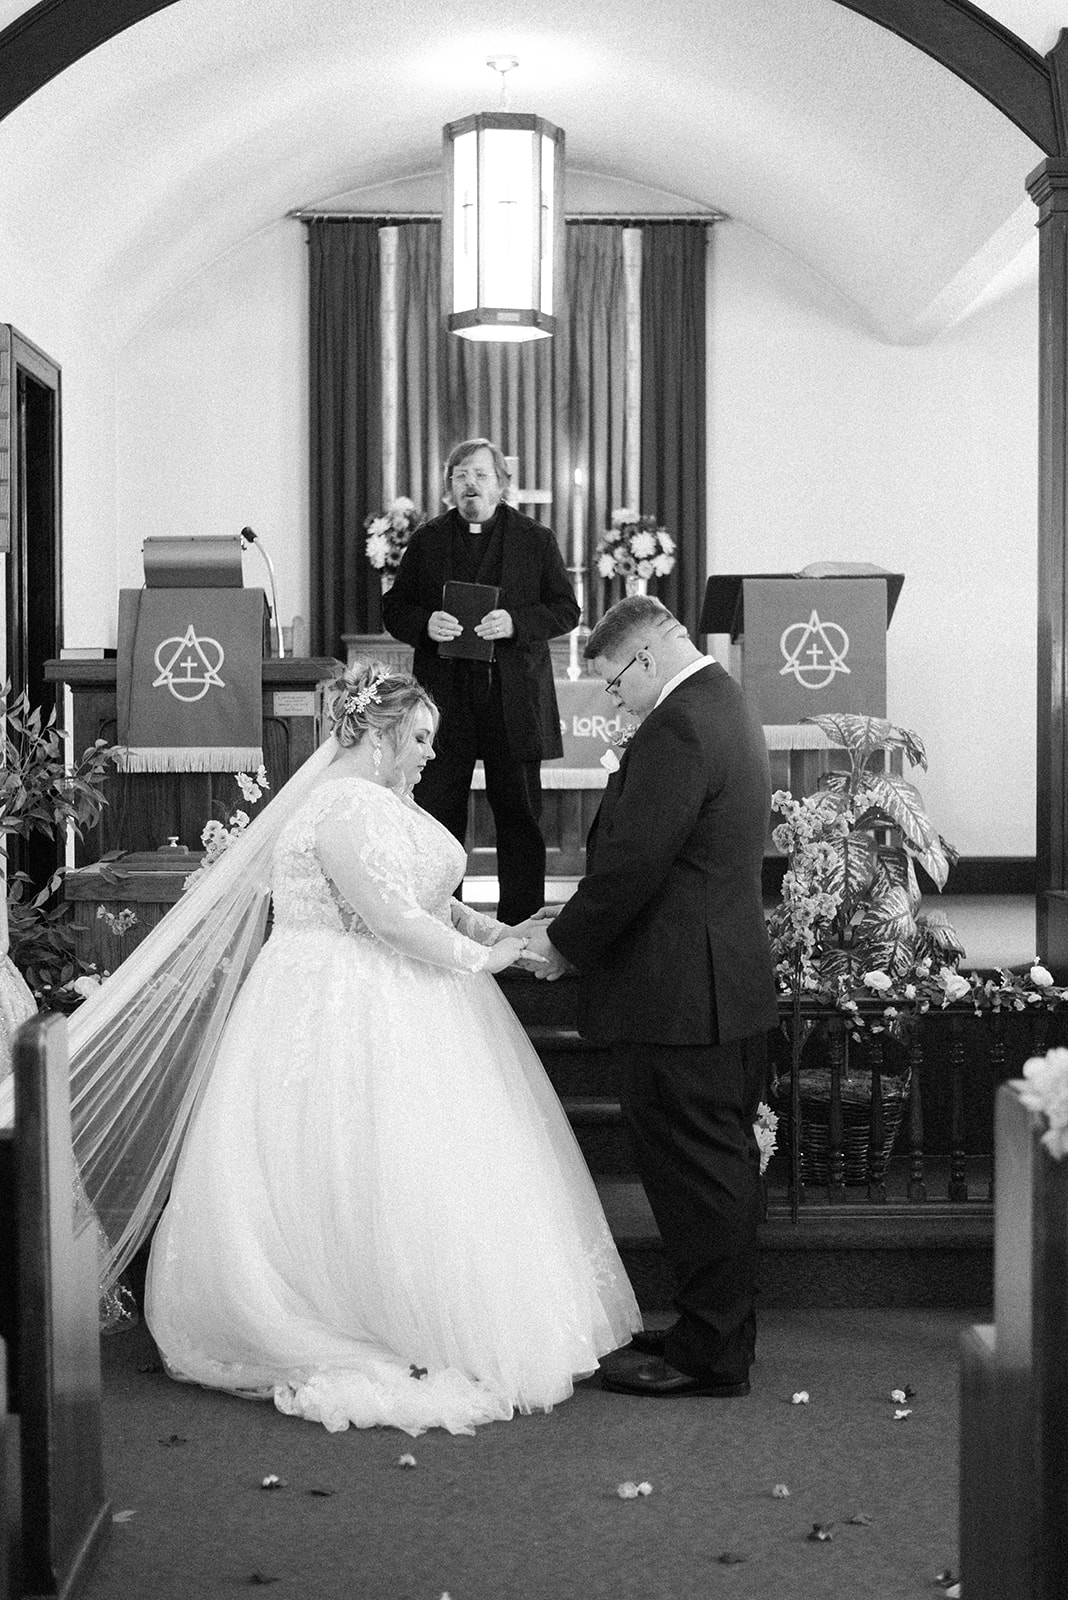 Pennsylvania wedding photographer captures bride and groom bowing heads at alter before wedding ceremony